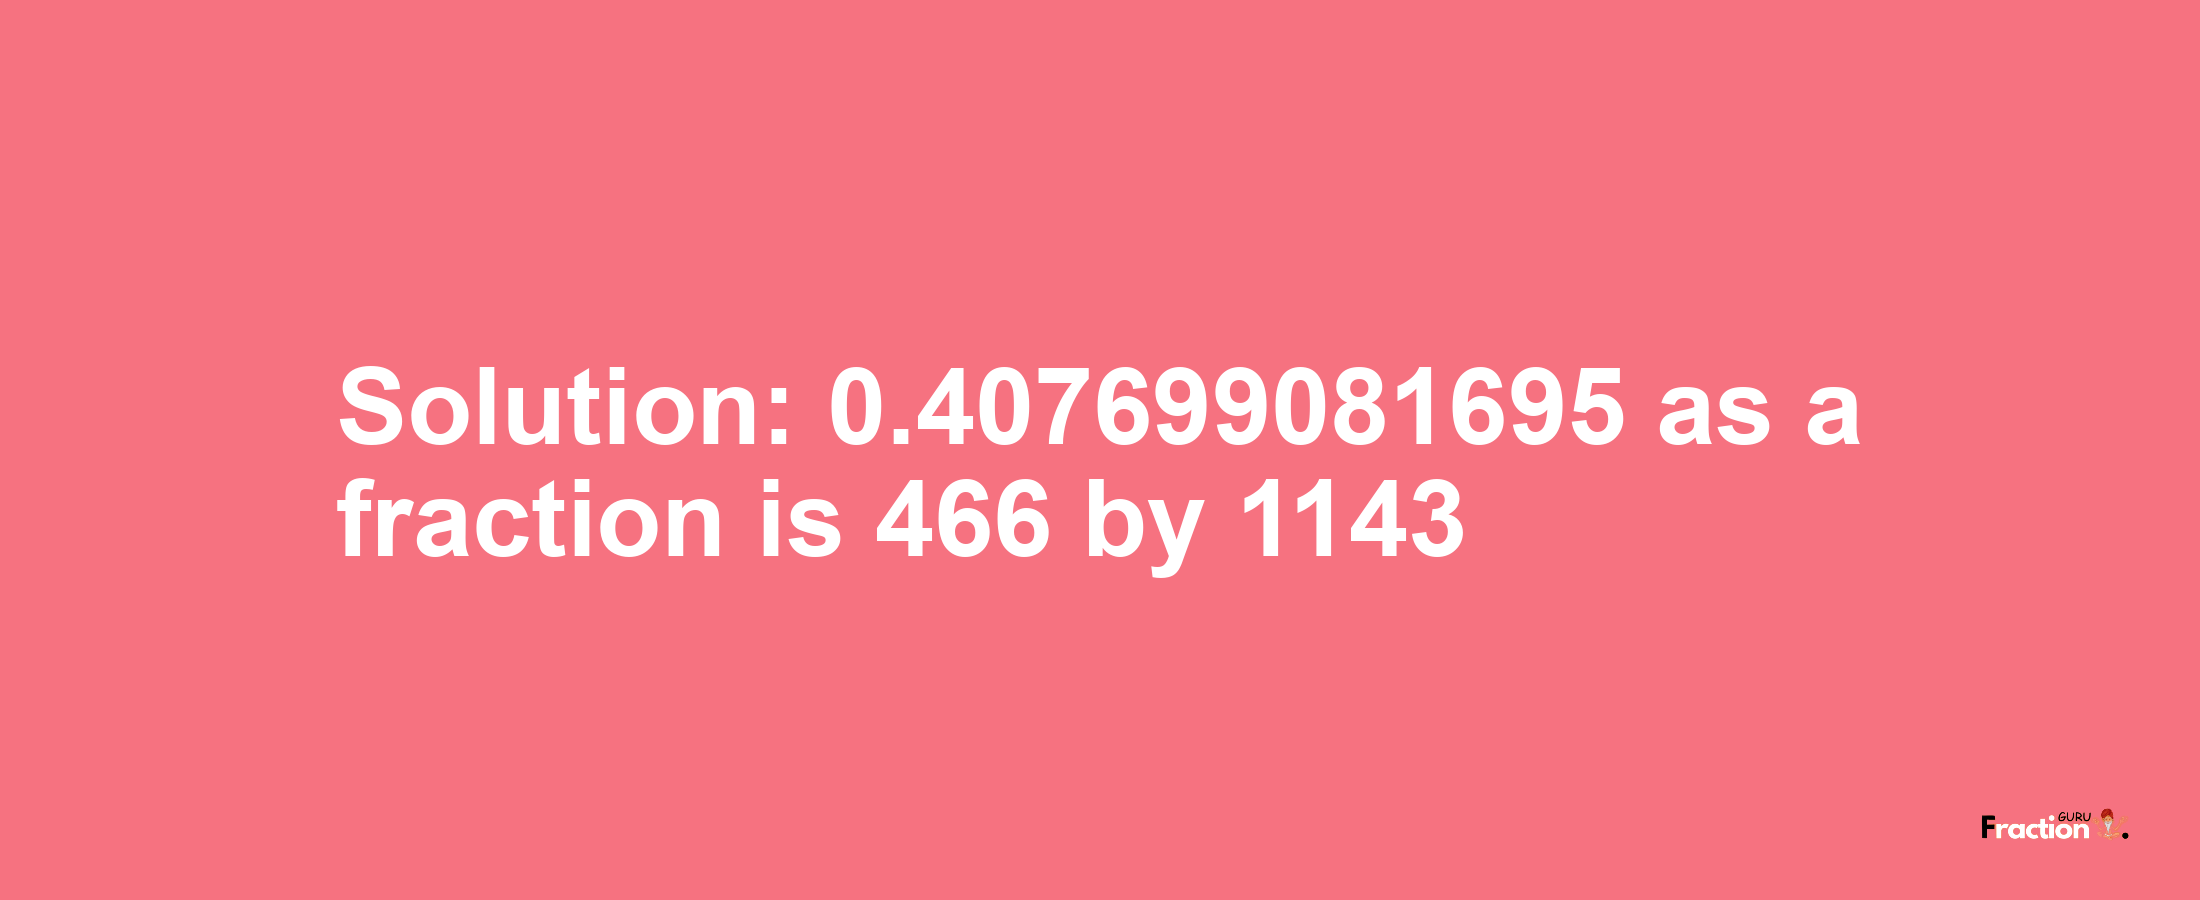 Solution:0.407699081695 as a fraction is 466/1143